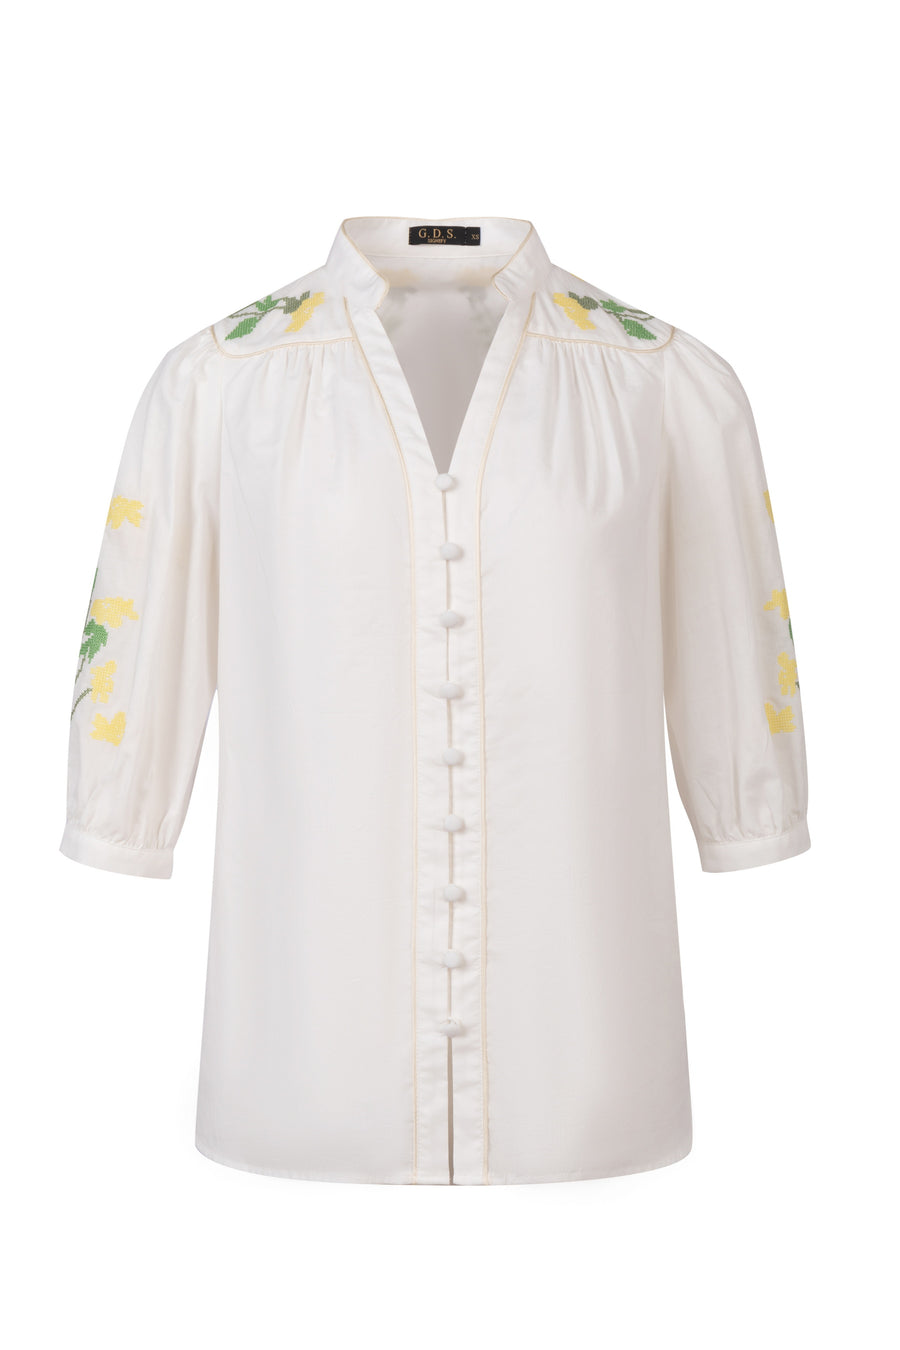 GDS Felice Embroidered Blouse | White DRESSES BLOUSES BRUNCH CASUAL Catch GDS HOLIDAY L M S SALE 40 % SPRING-SUMMER WHITE WORK XL XS